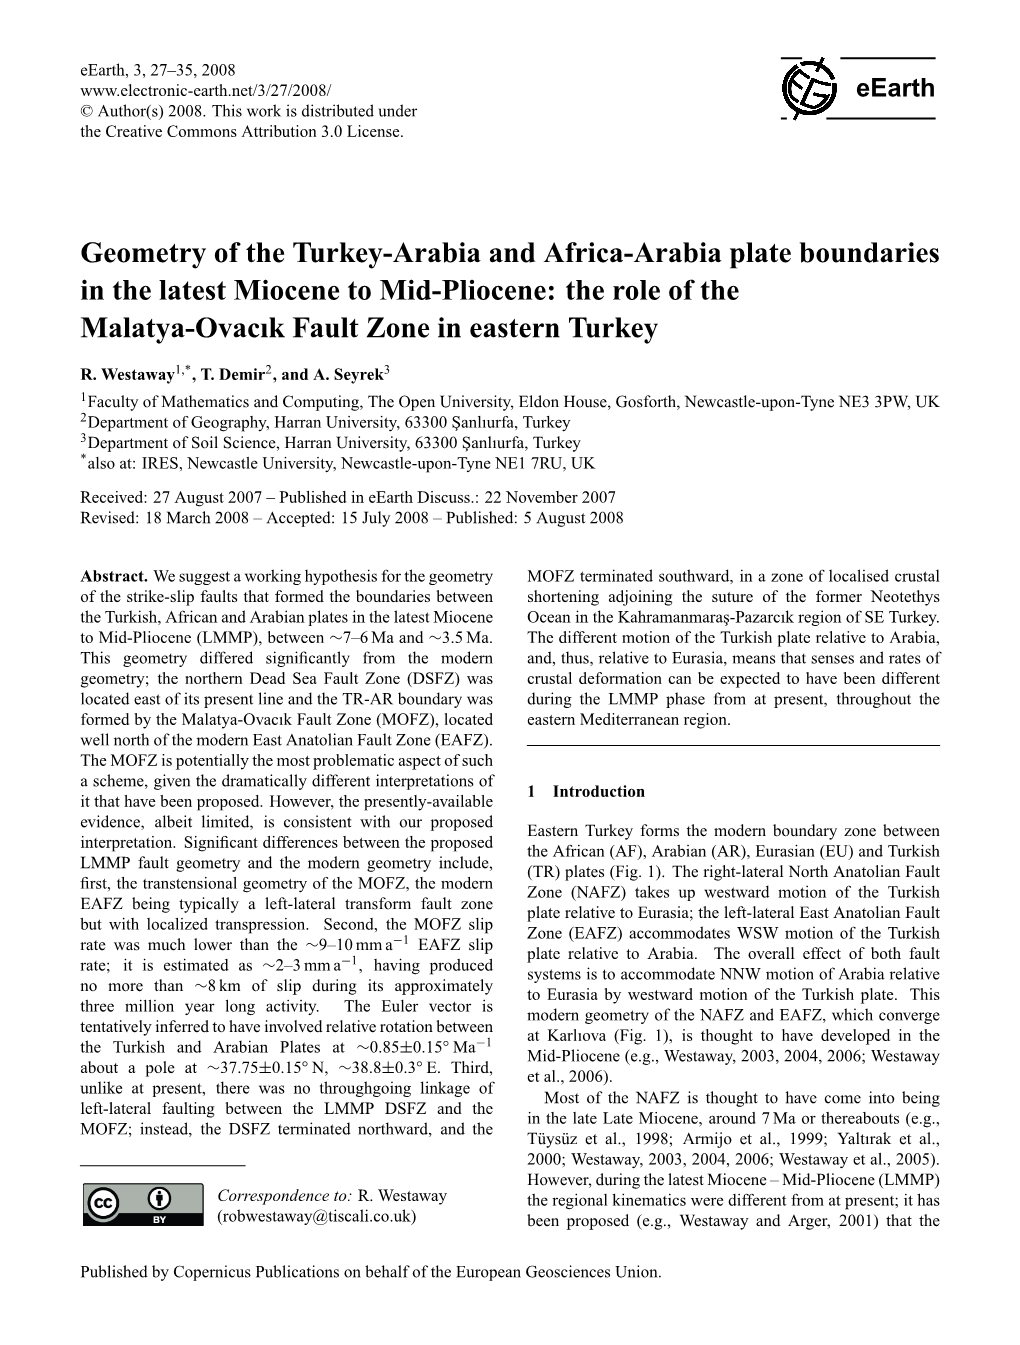 Geometry of the Turkey-Arabia and Africa-Arabia Plate Boundaries in the Latest Miocene to Mid-Pliocene: the Role of the Malatya-Ovacık Fault Zone in Eastern Turkey